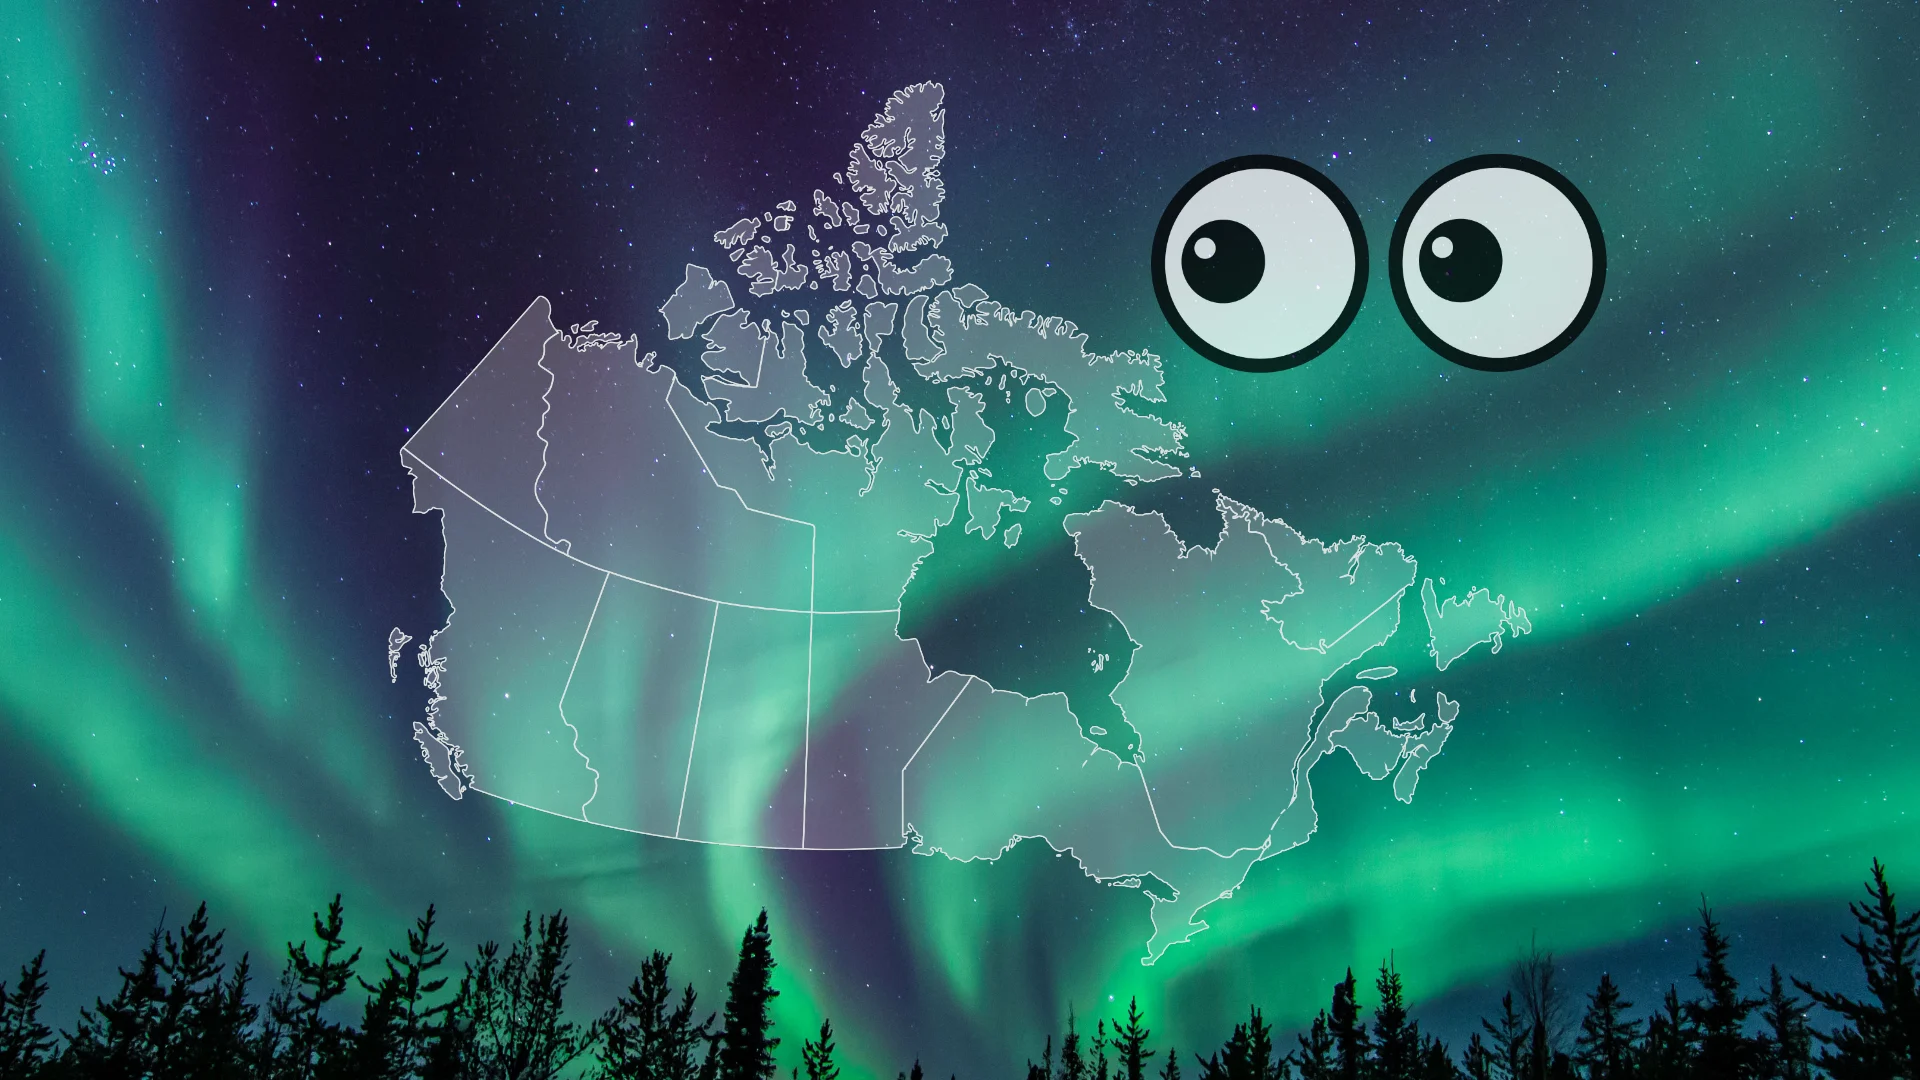 A ‘severe’ geomagnetic storm may spread dazzling auroras across Canada on Friday night. Here’s why B.C. might struggle to see it